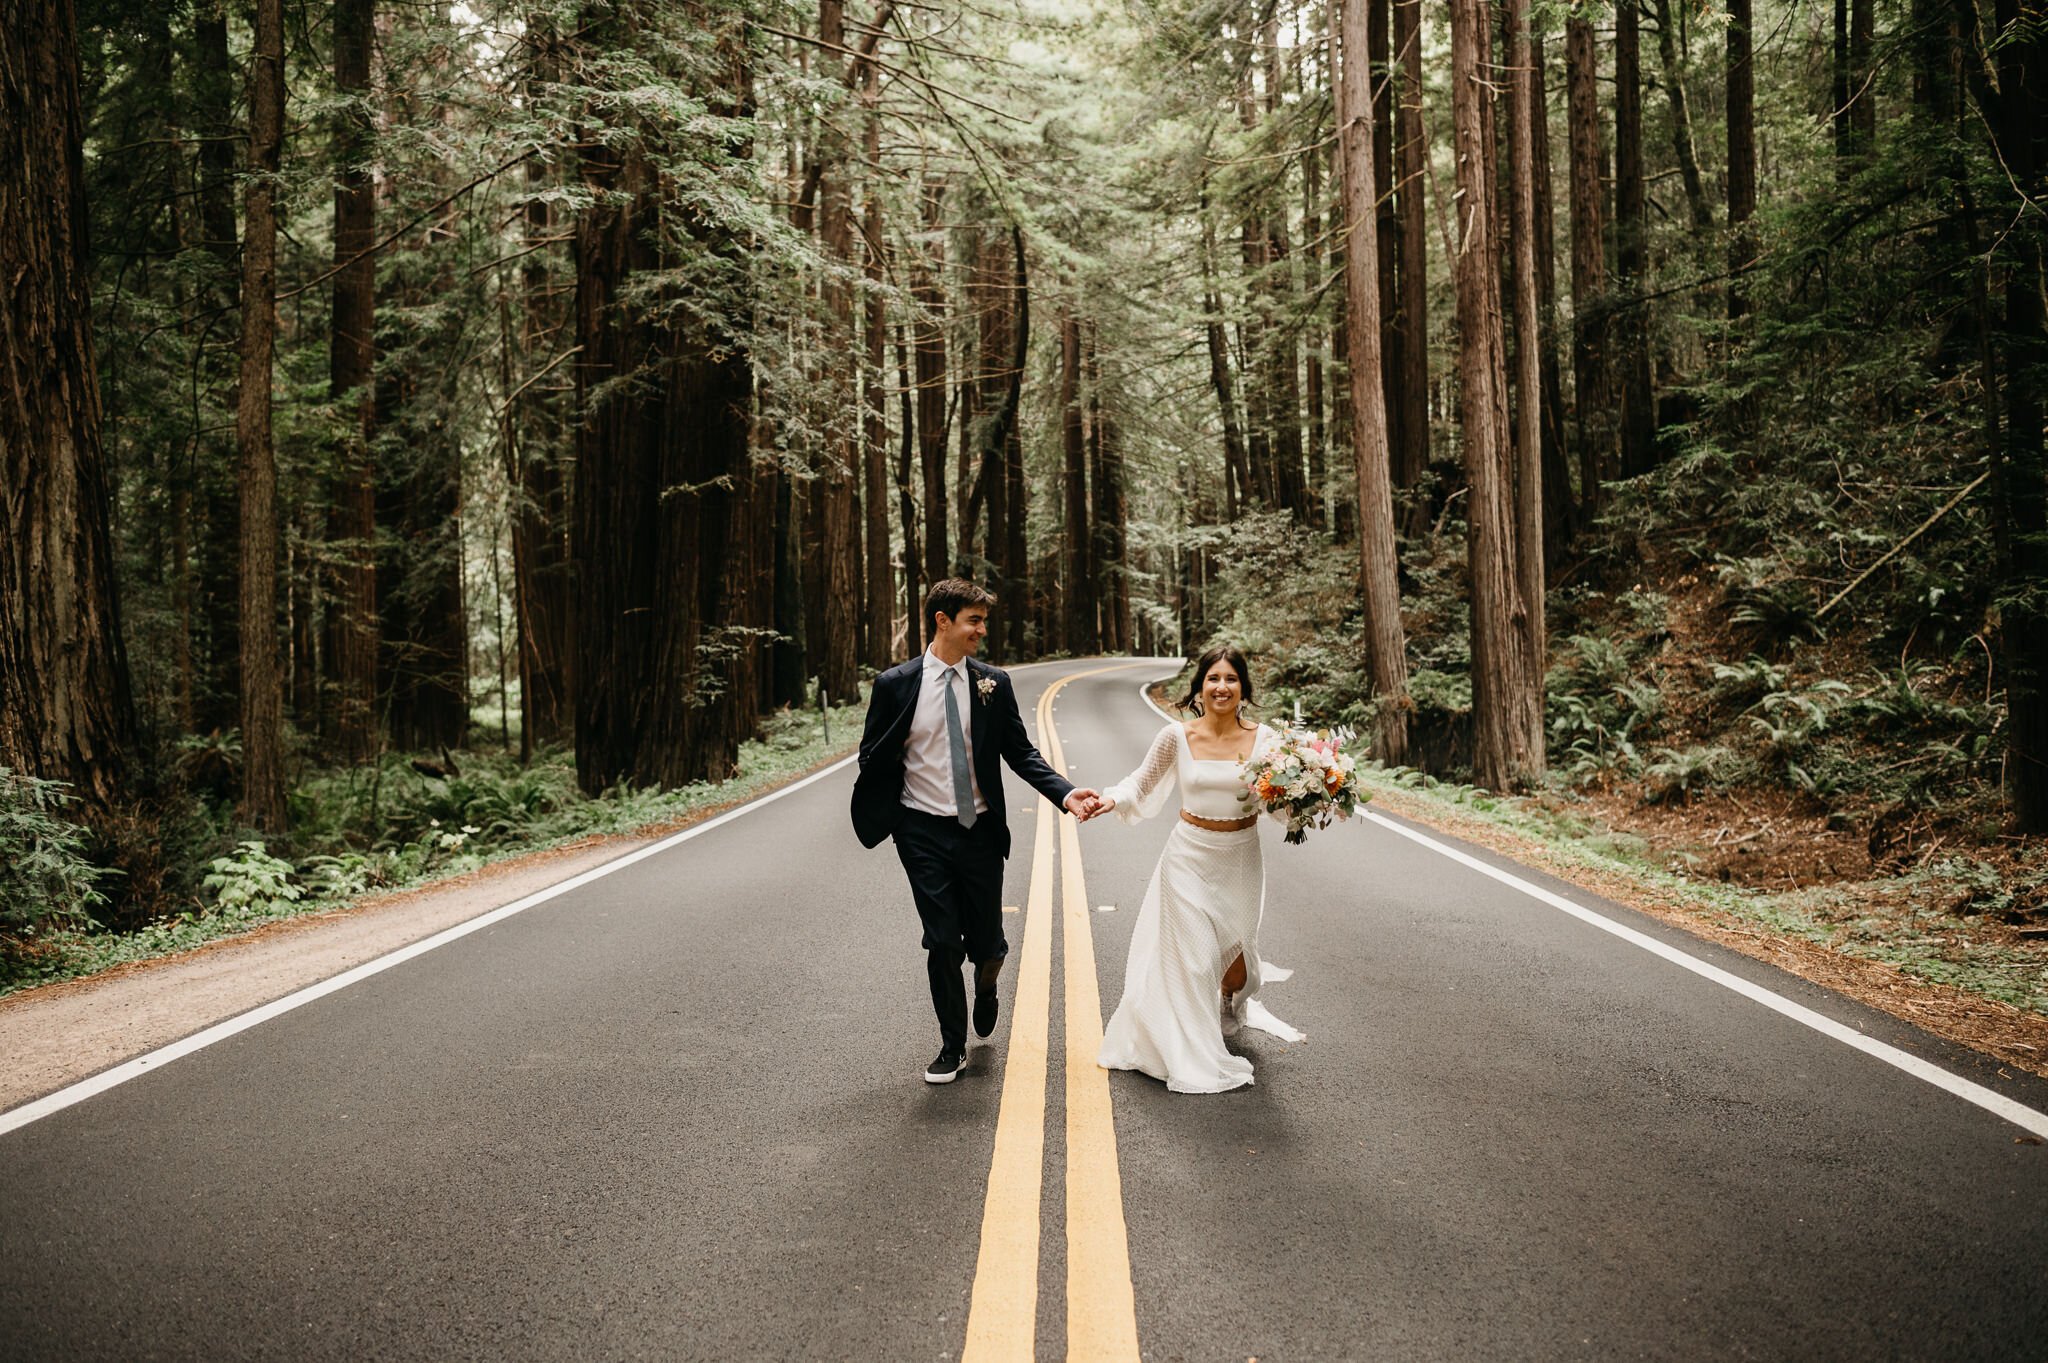 Bride and groom in wedding attire holding hands walking down middle of the road, with redwood trees on both sides of them after their forest ceremony.